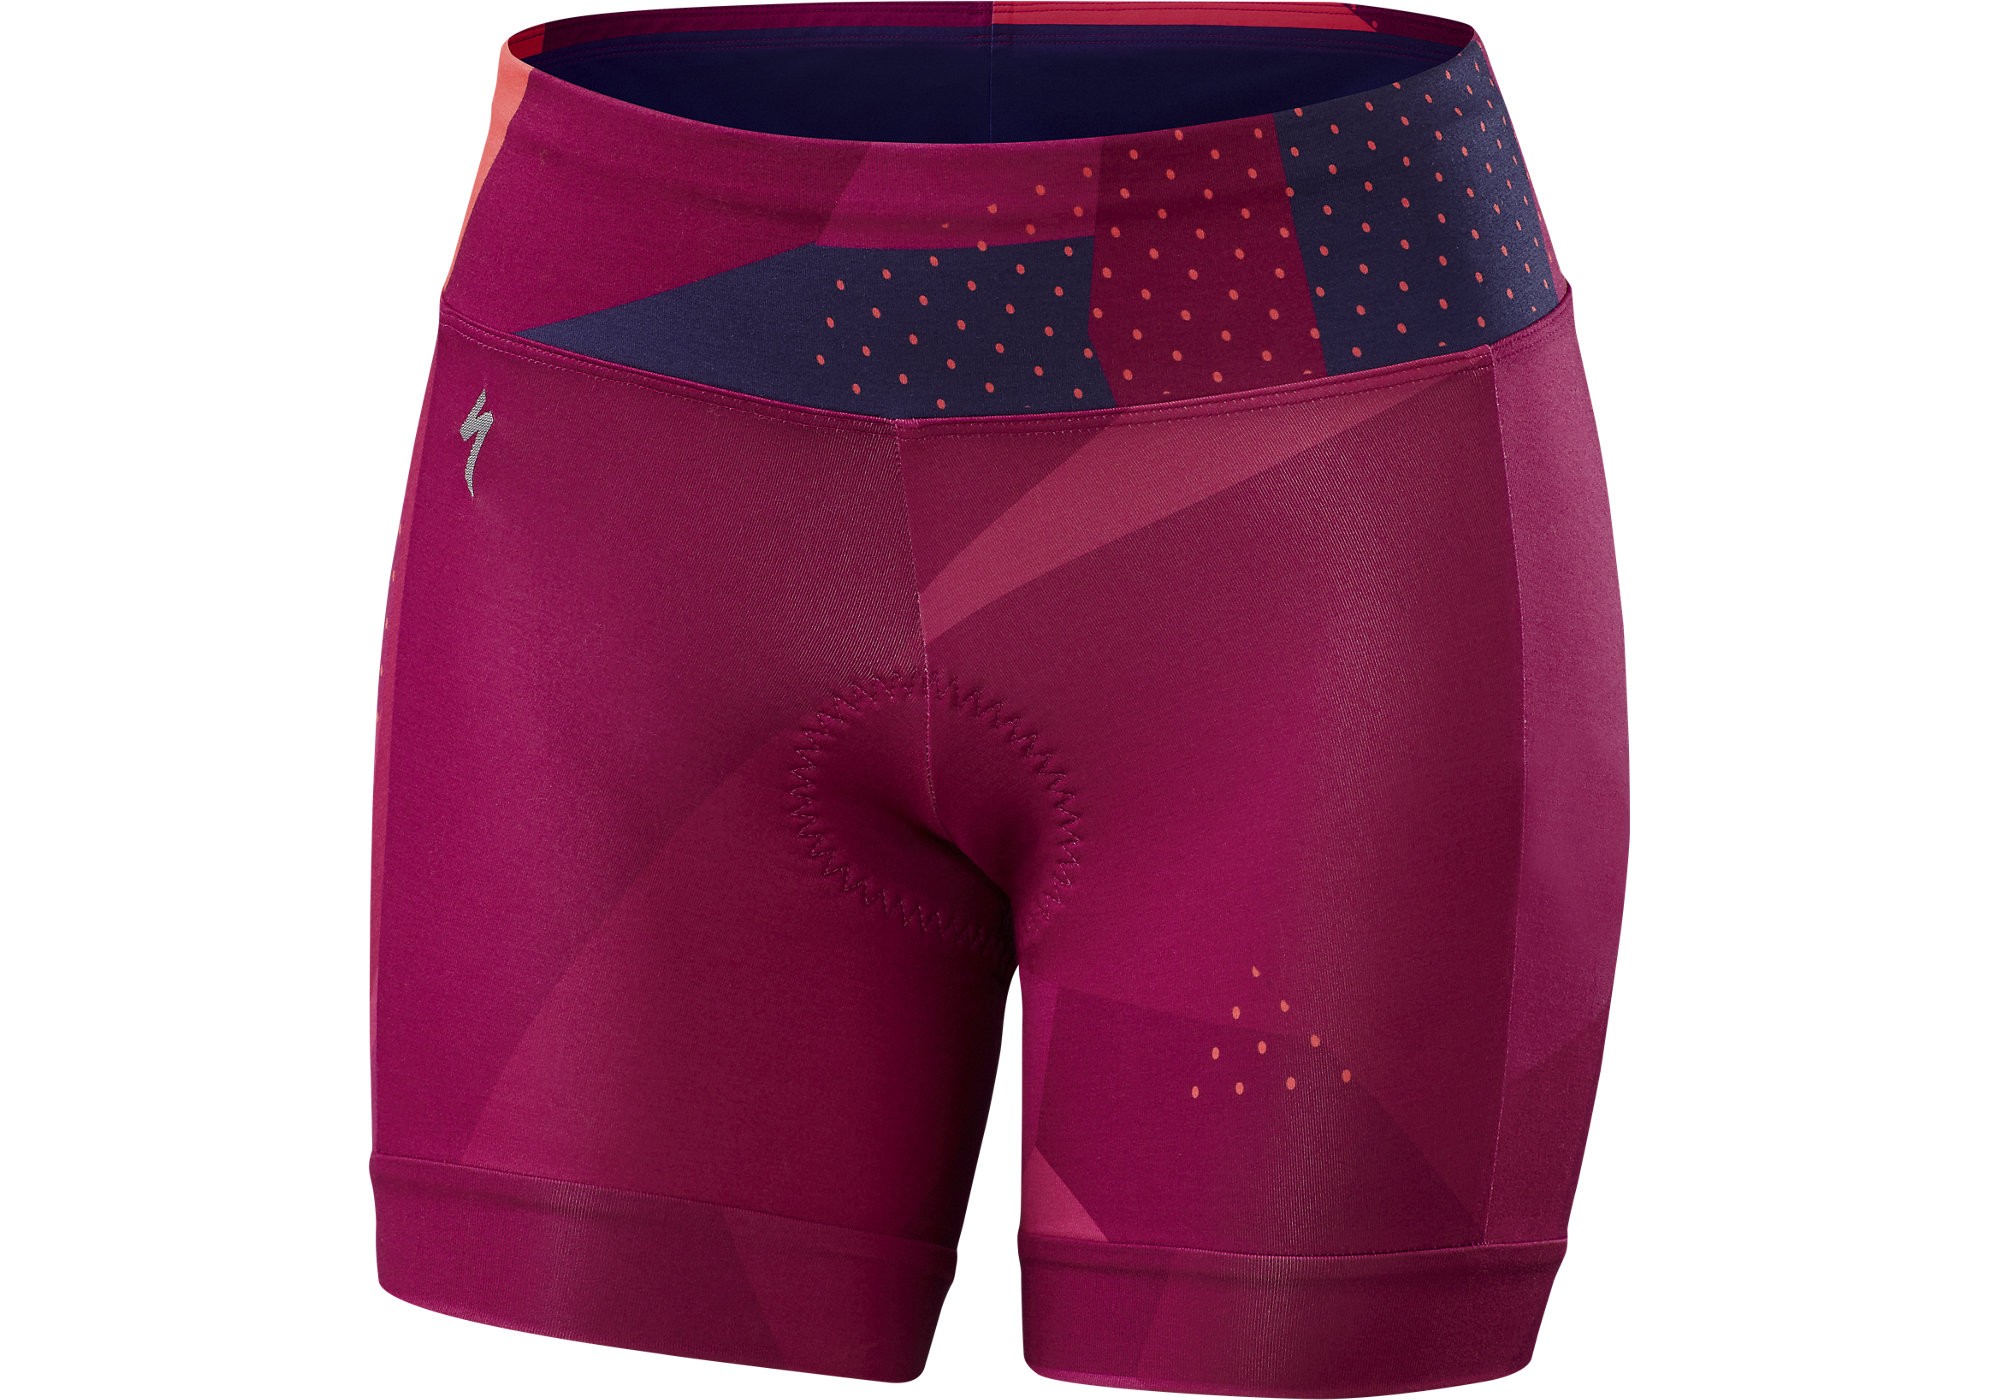 Femme Specialized Shasta 3//4 Cyclisme Culotte Large